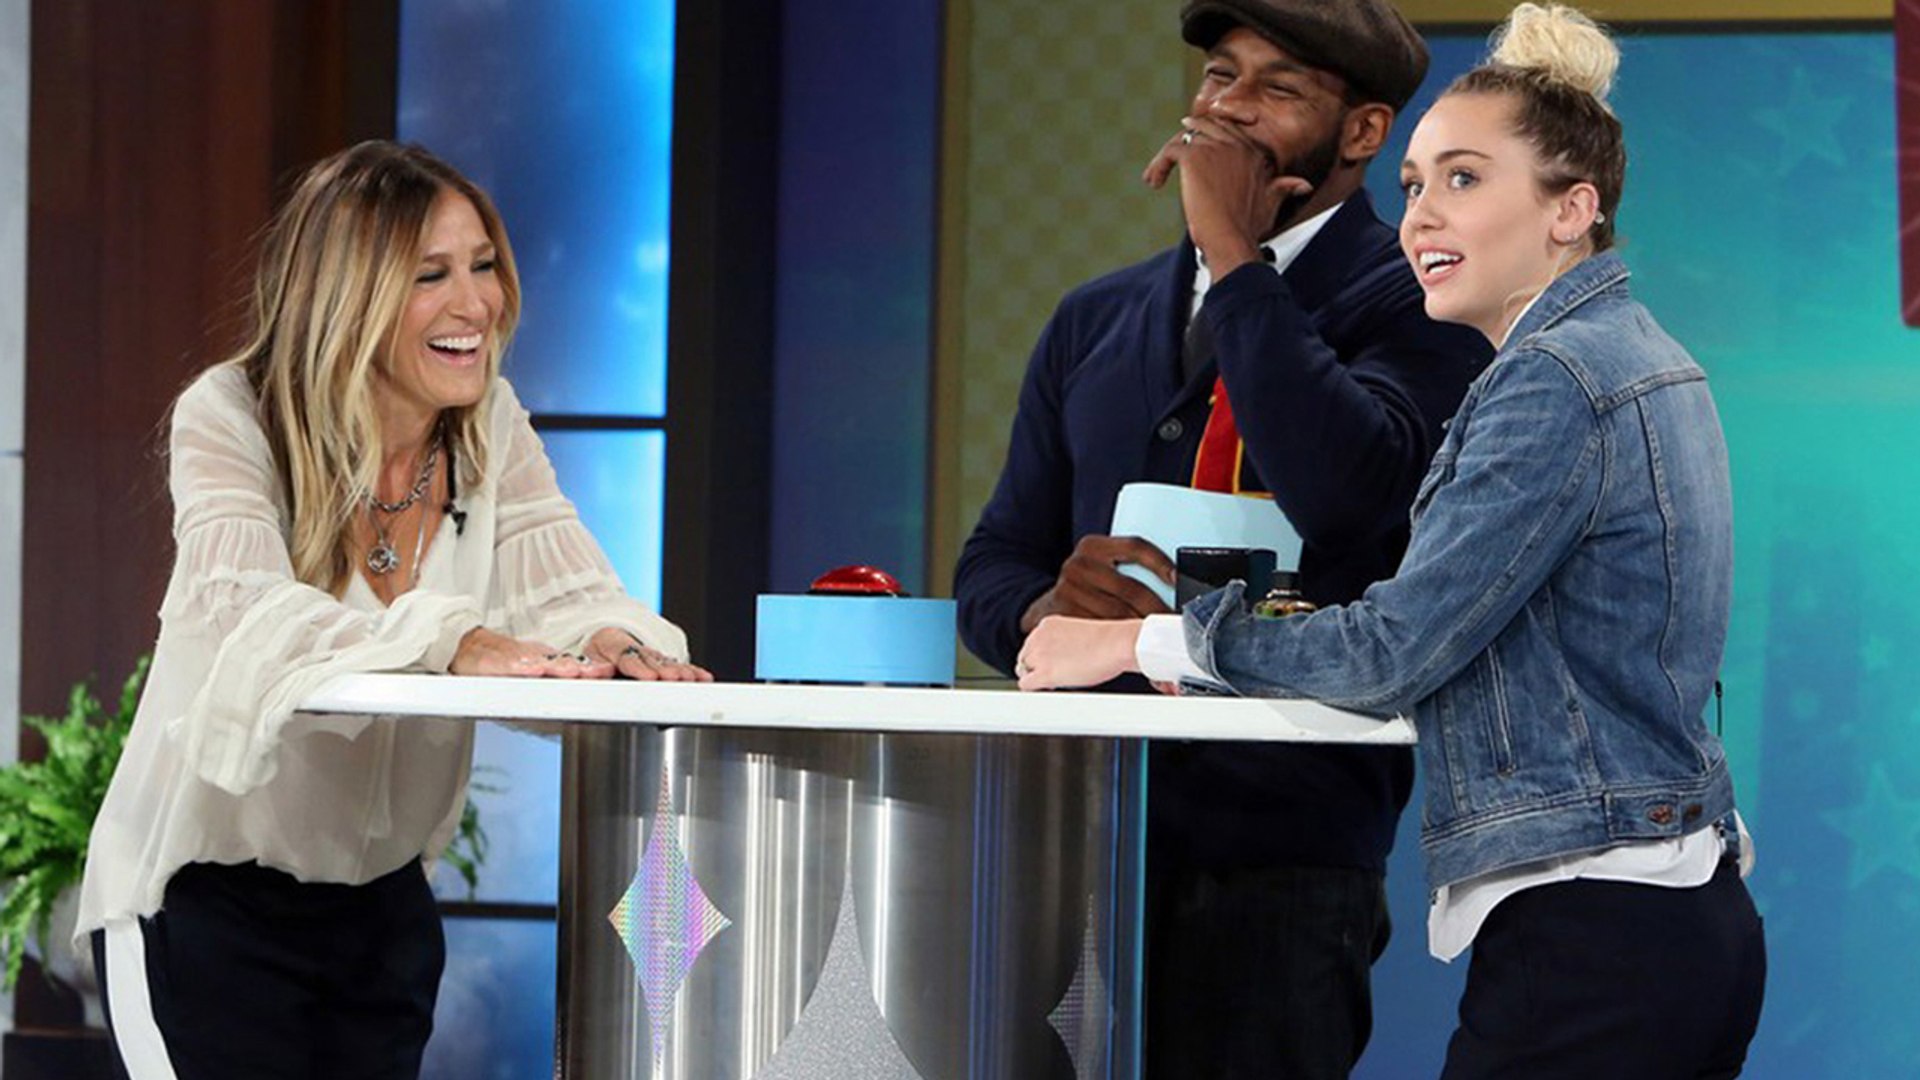 Sarah Jessica Parker and Miley Cyrus Play 'Five Second Rule